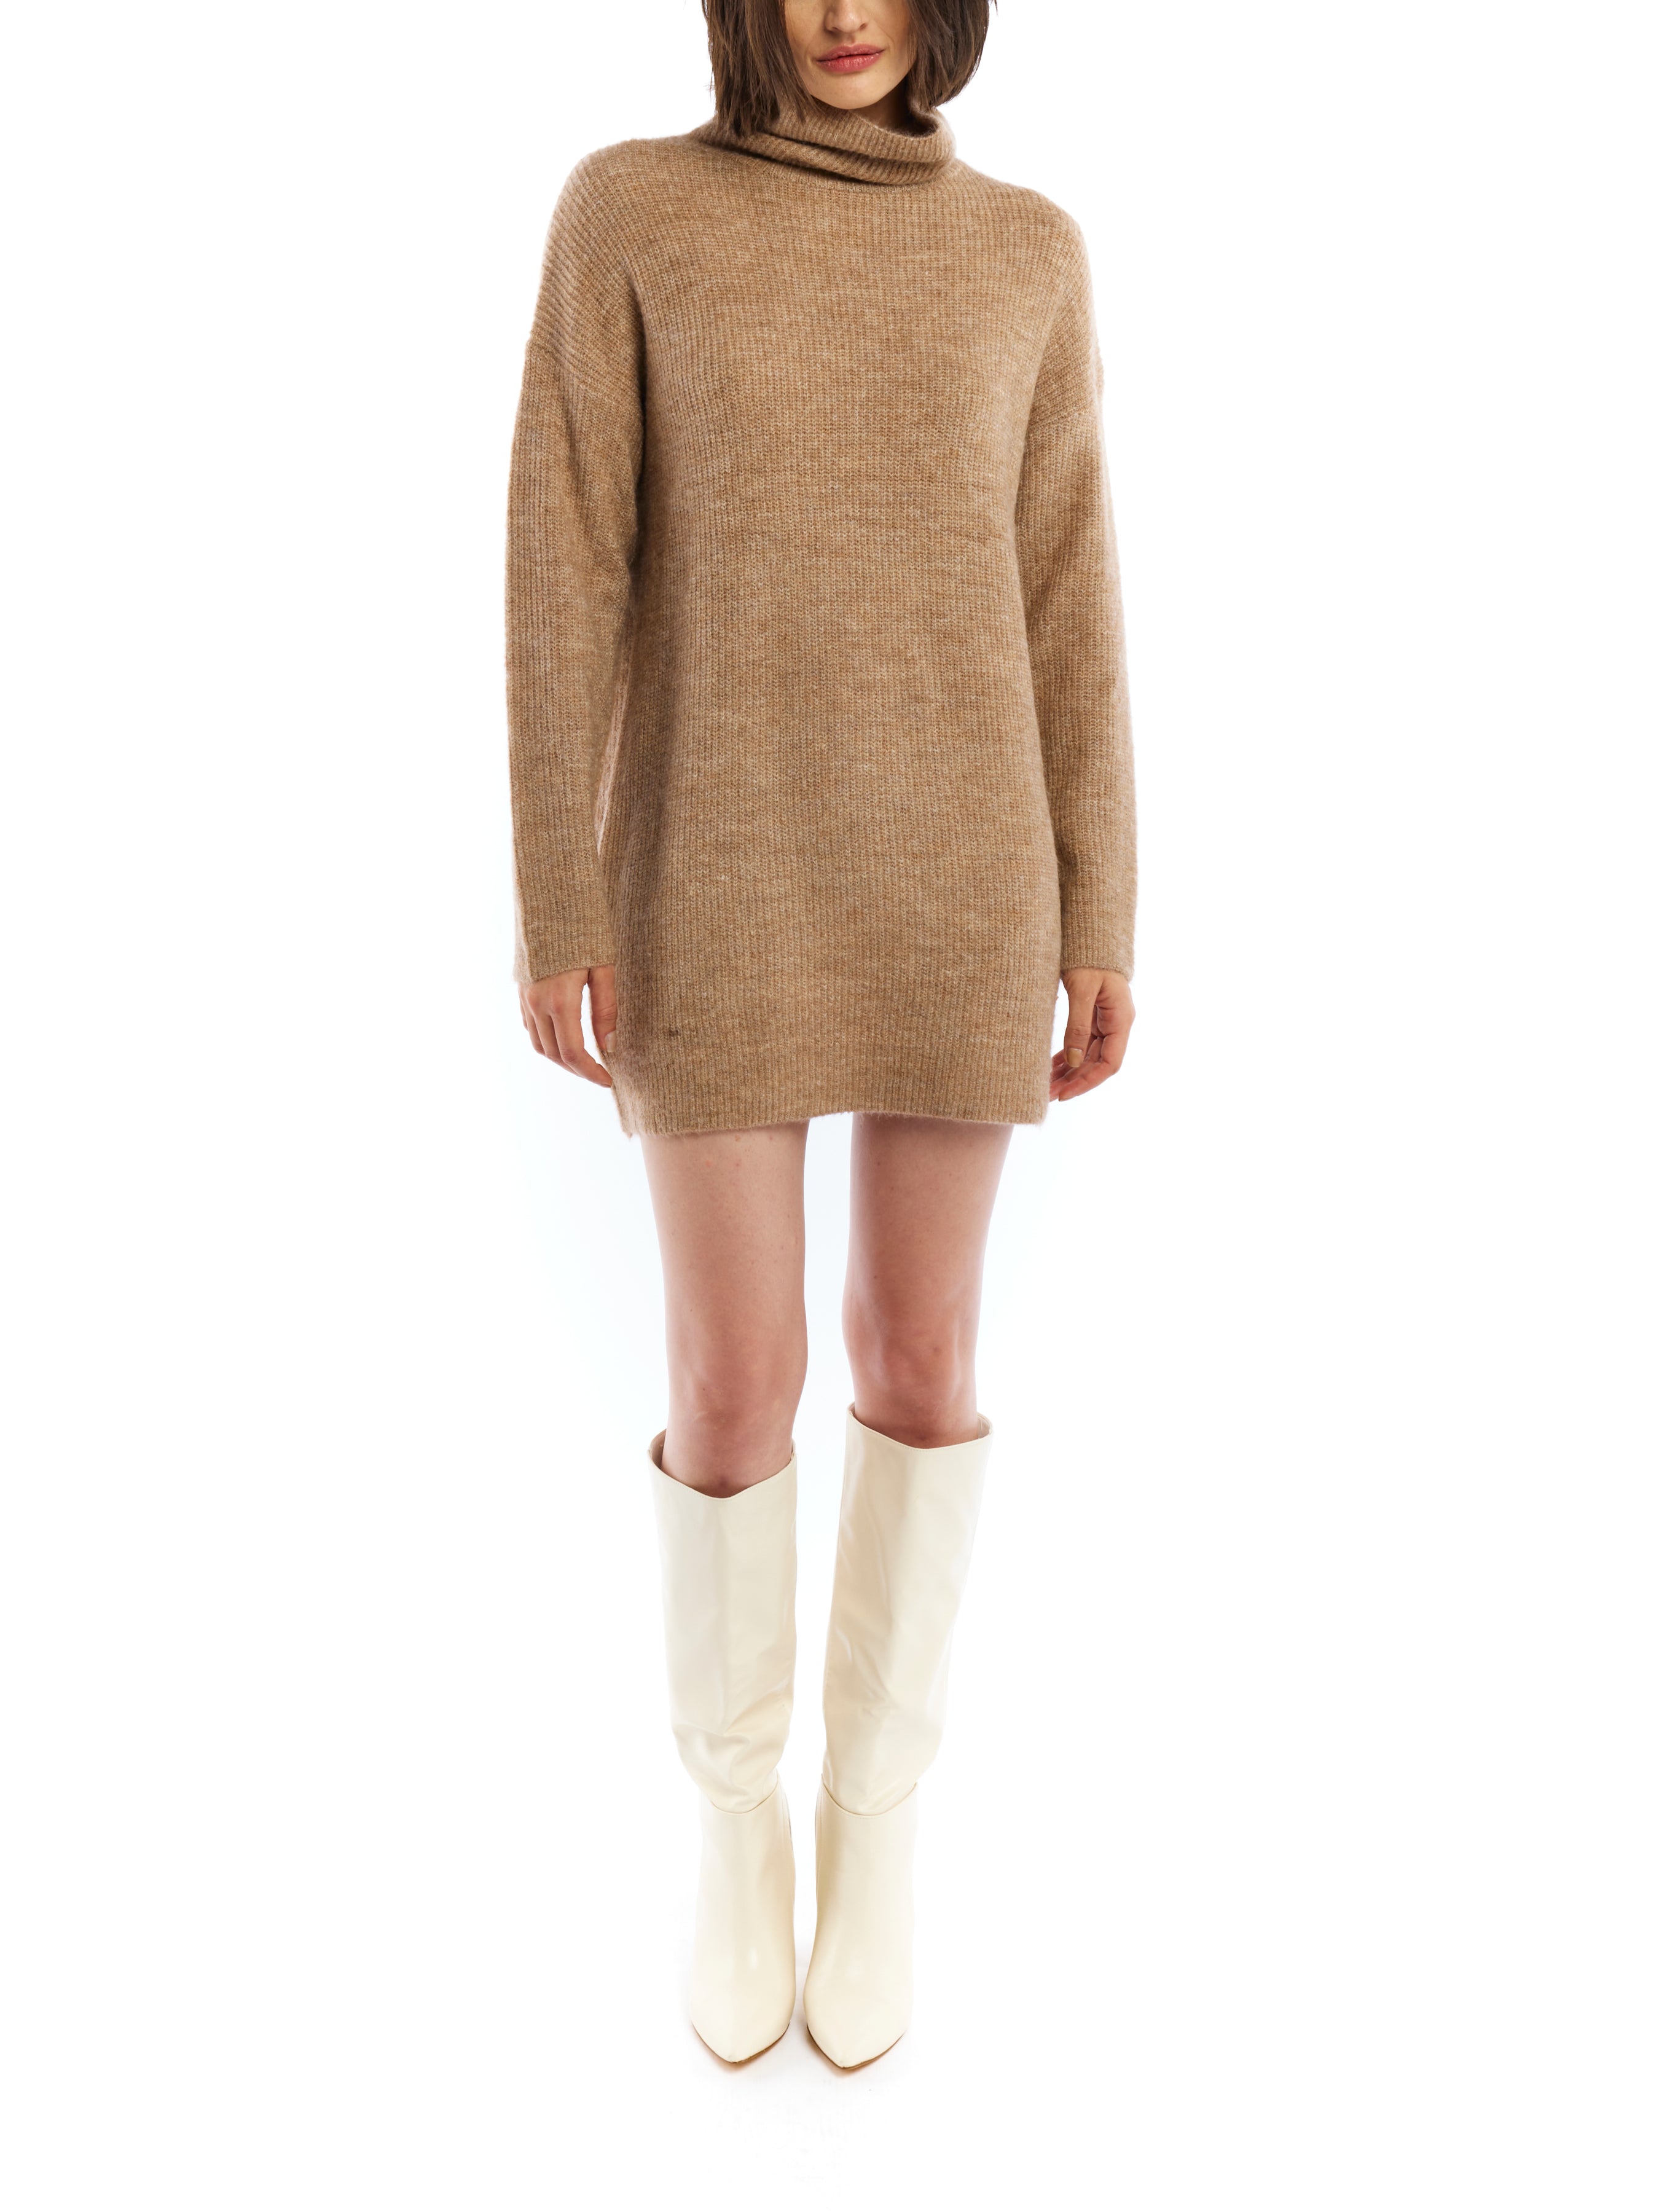 turtleneck sweater dress featuring long sleeves, a mini length, ribbed hem and cuffs and a drop shoulder seam in coco